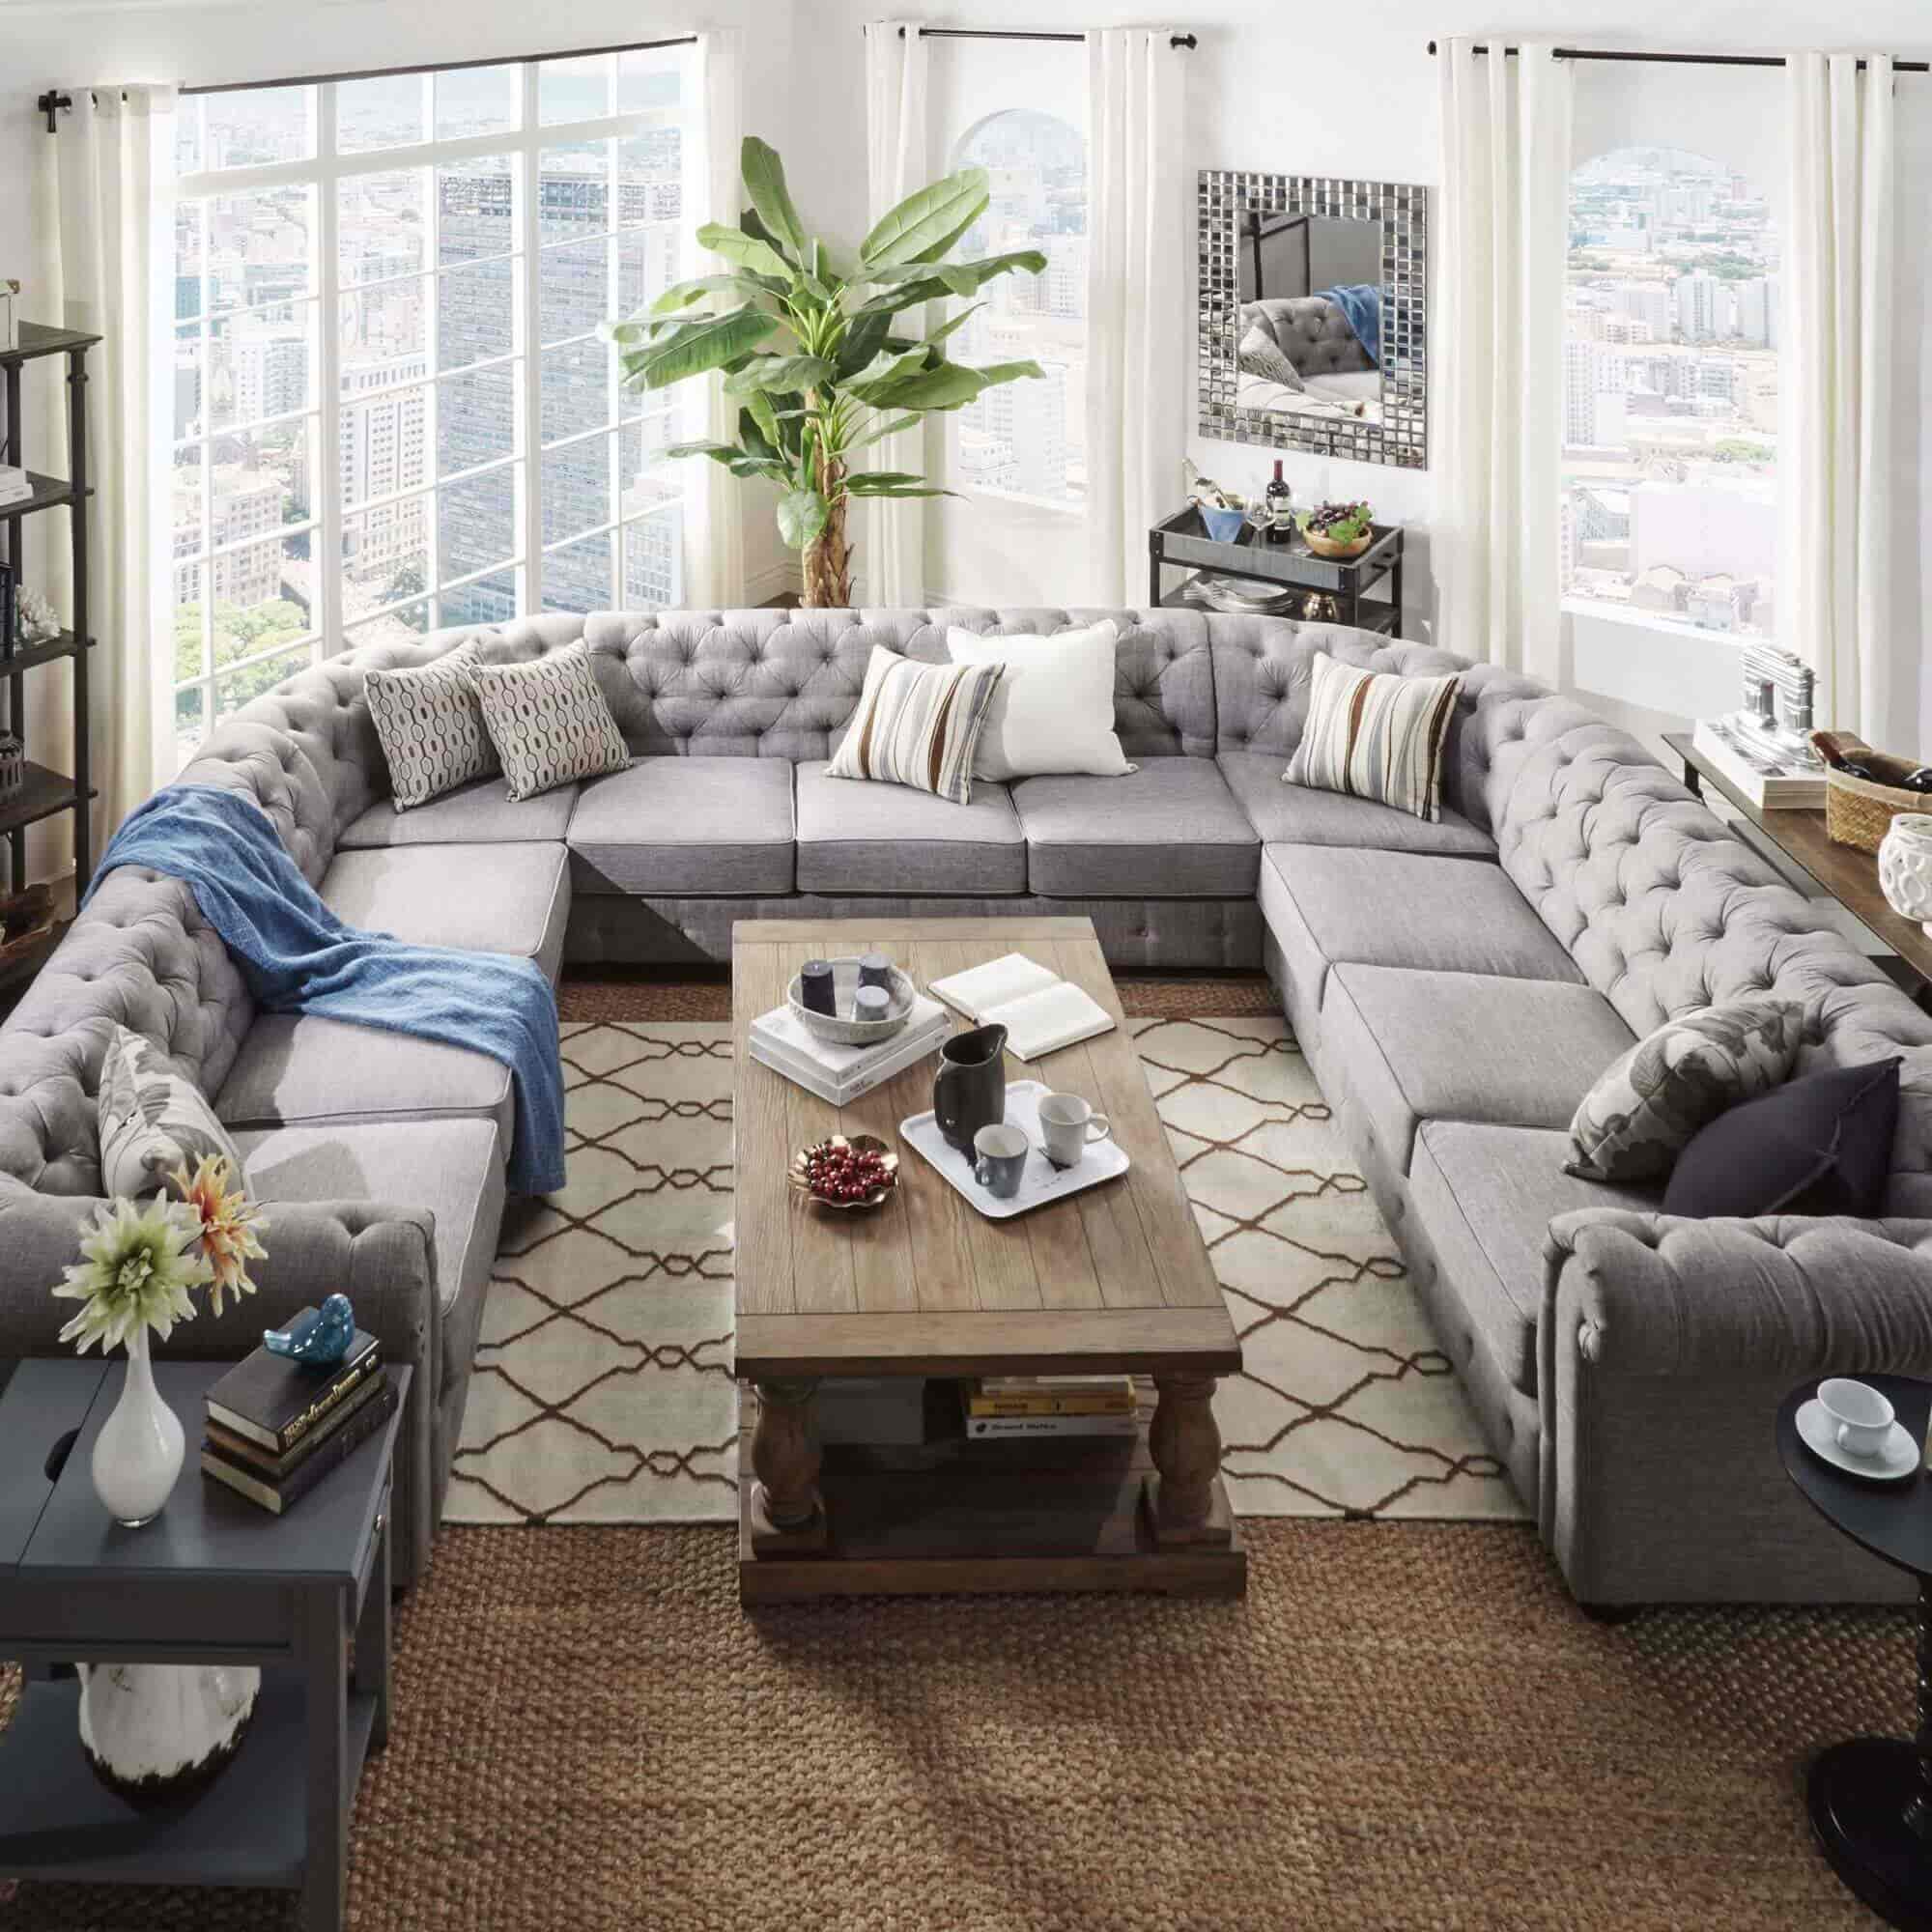 How To Pick The Best Coffee Table For Your Sectional Sofa The Architecture Designs